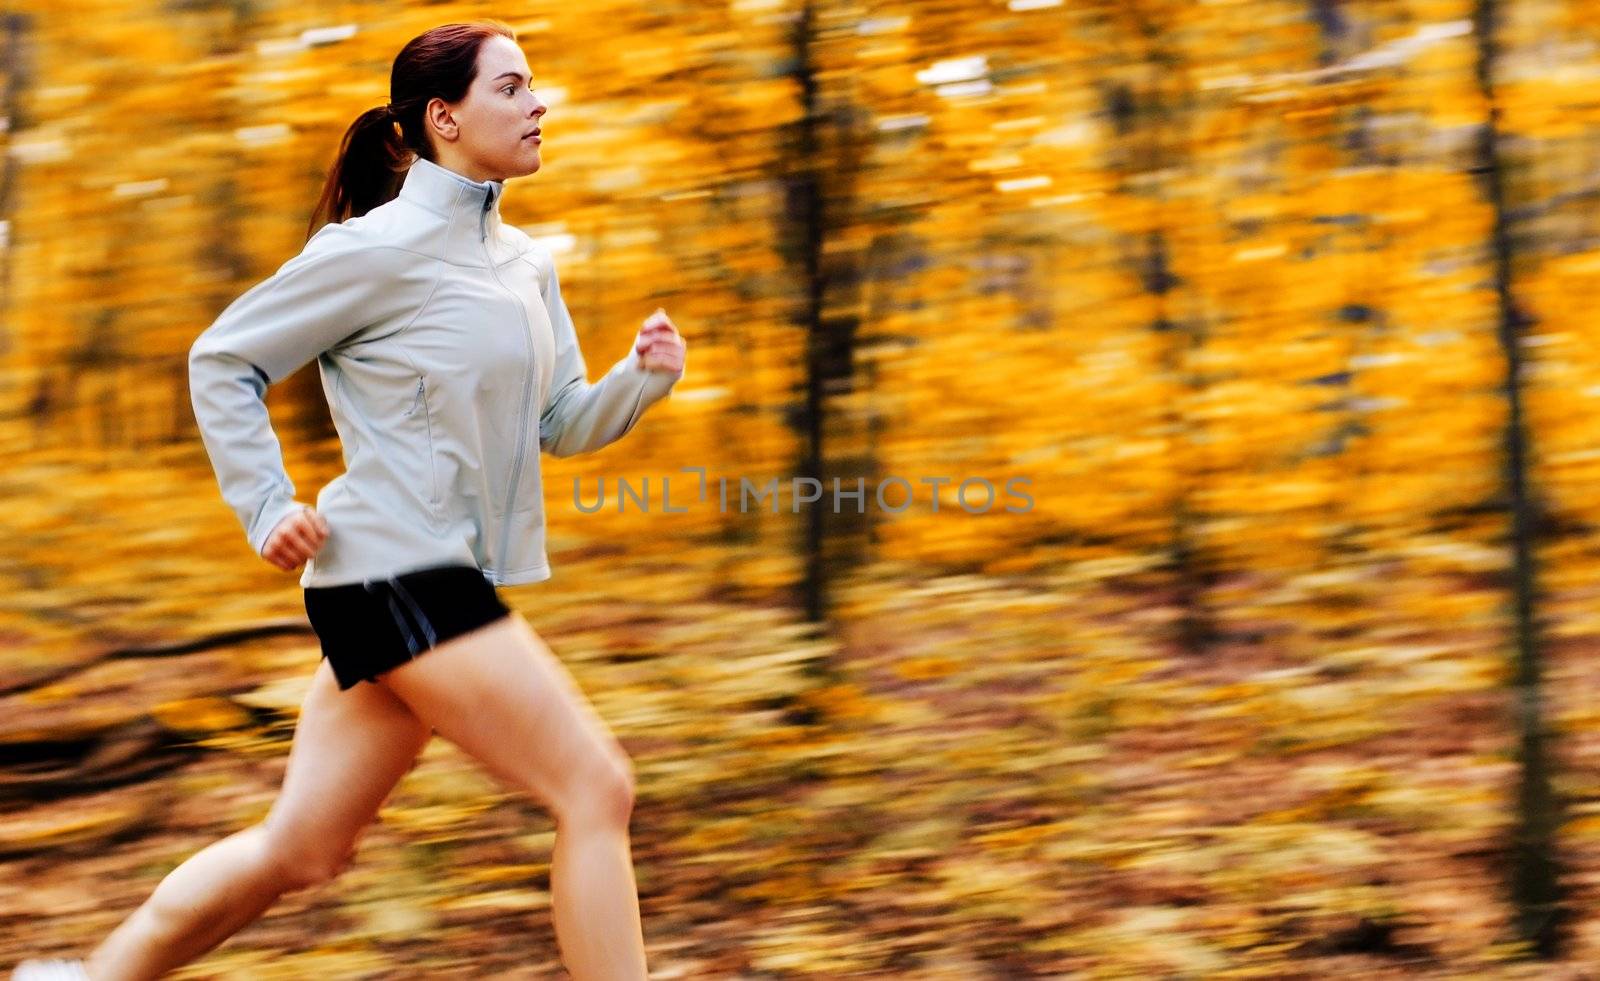 Beautiful young woman running in a fall forest.